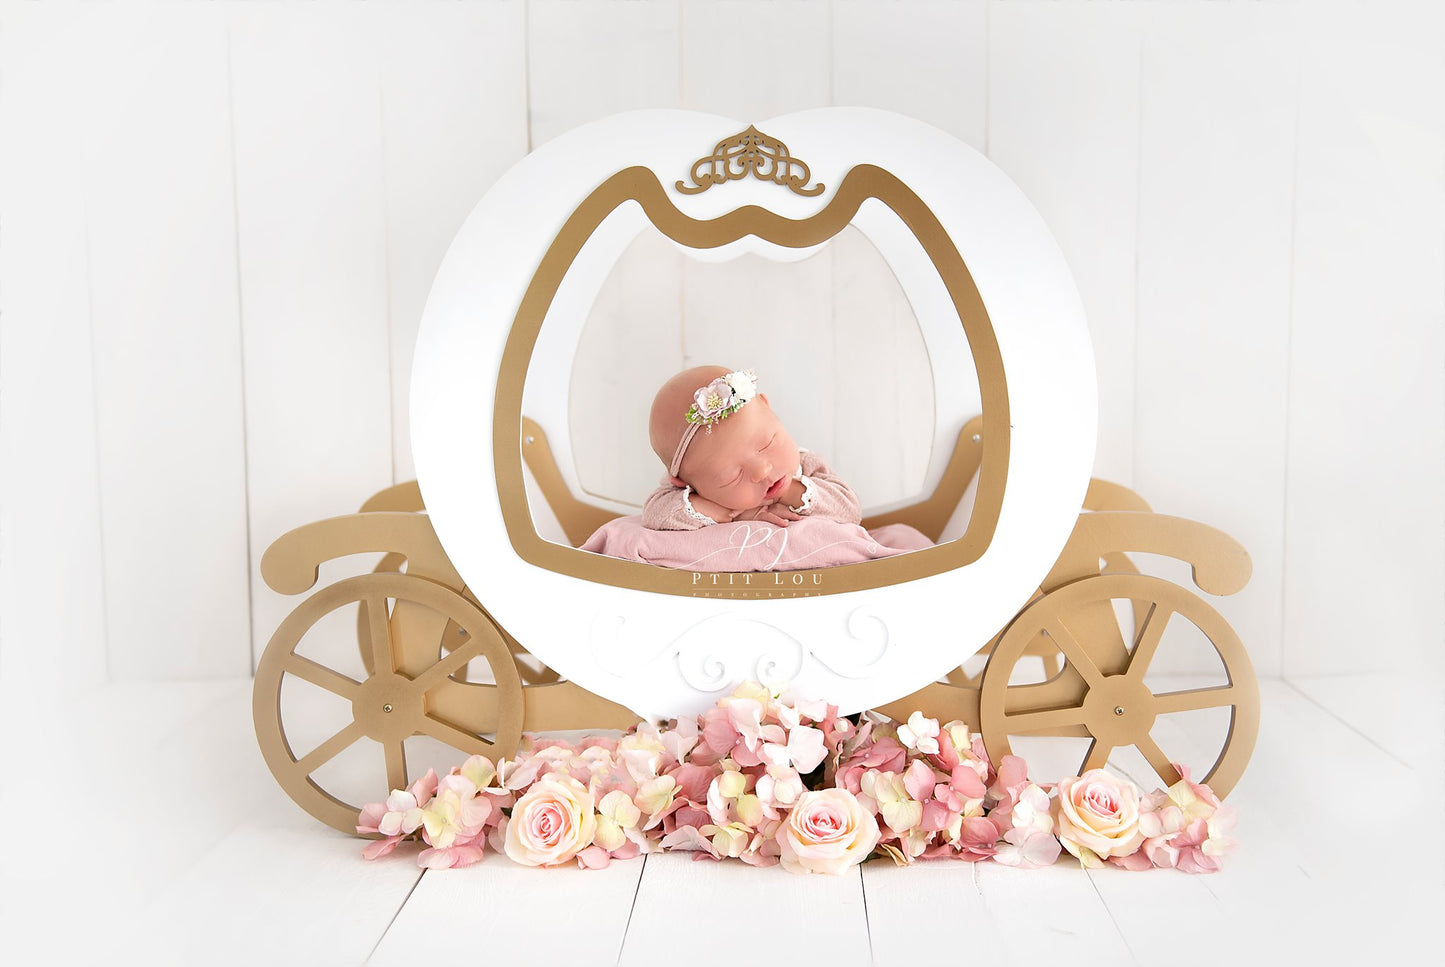 This princess carriage prop for newborn photography is perfect for any little princess OR prince! Add a few flower bundles and a simple backdrop or setup a lovely fantasy backdrop with pumpkins all around. This carriage is definitely the best prop to wow your clients.